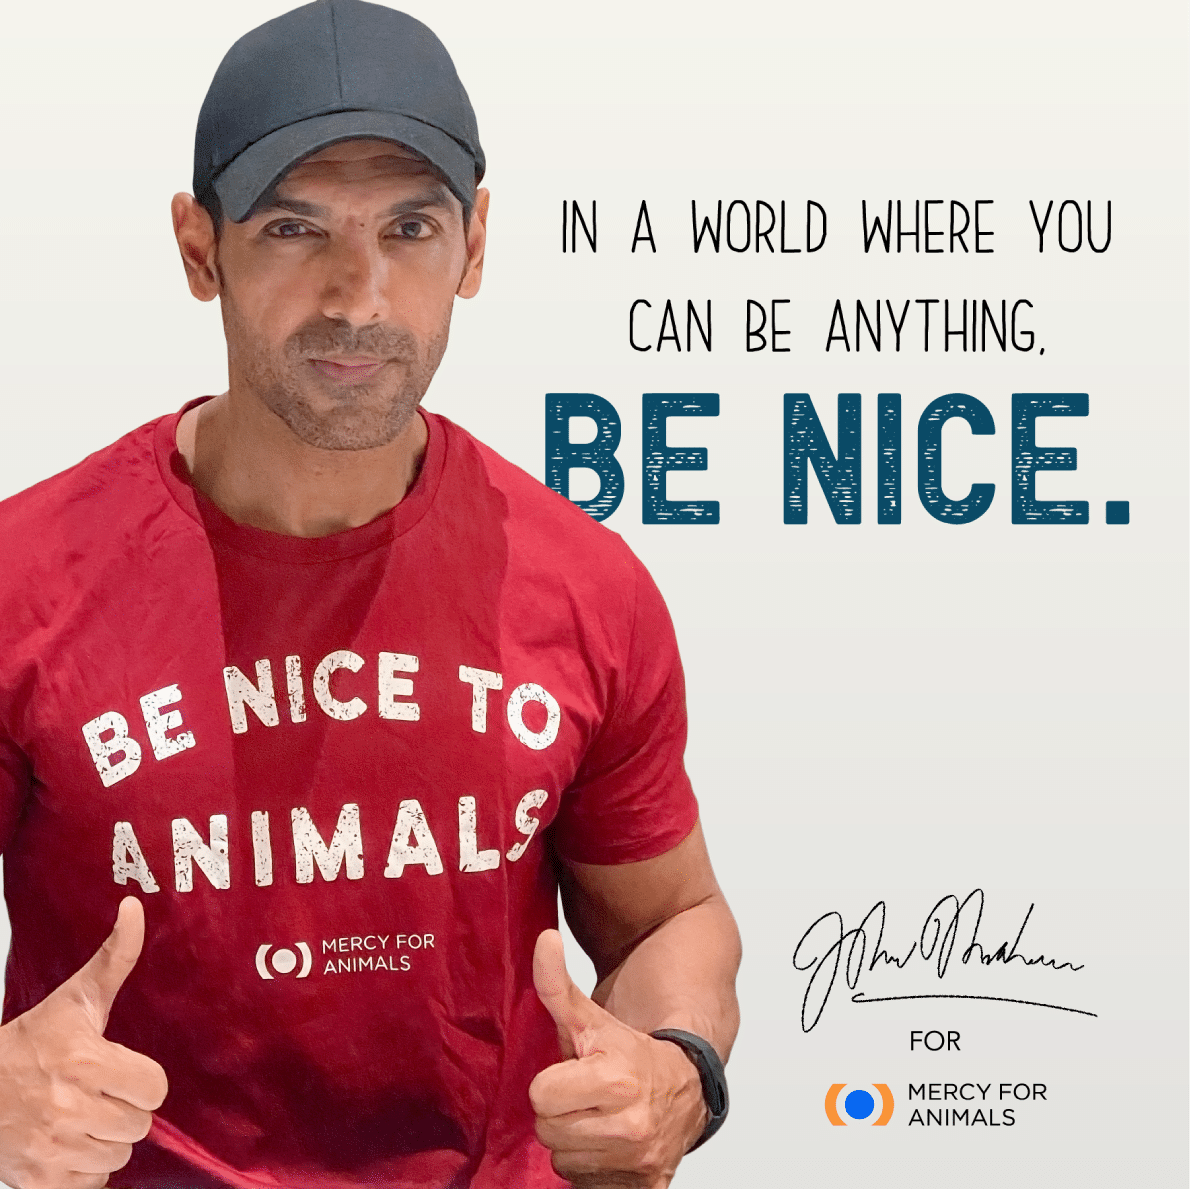 John Abraham Stars in New Mercy For Animals Ad Campaign.